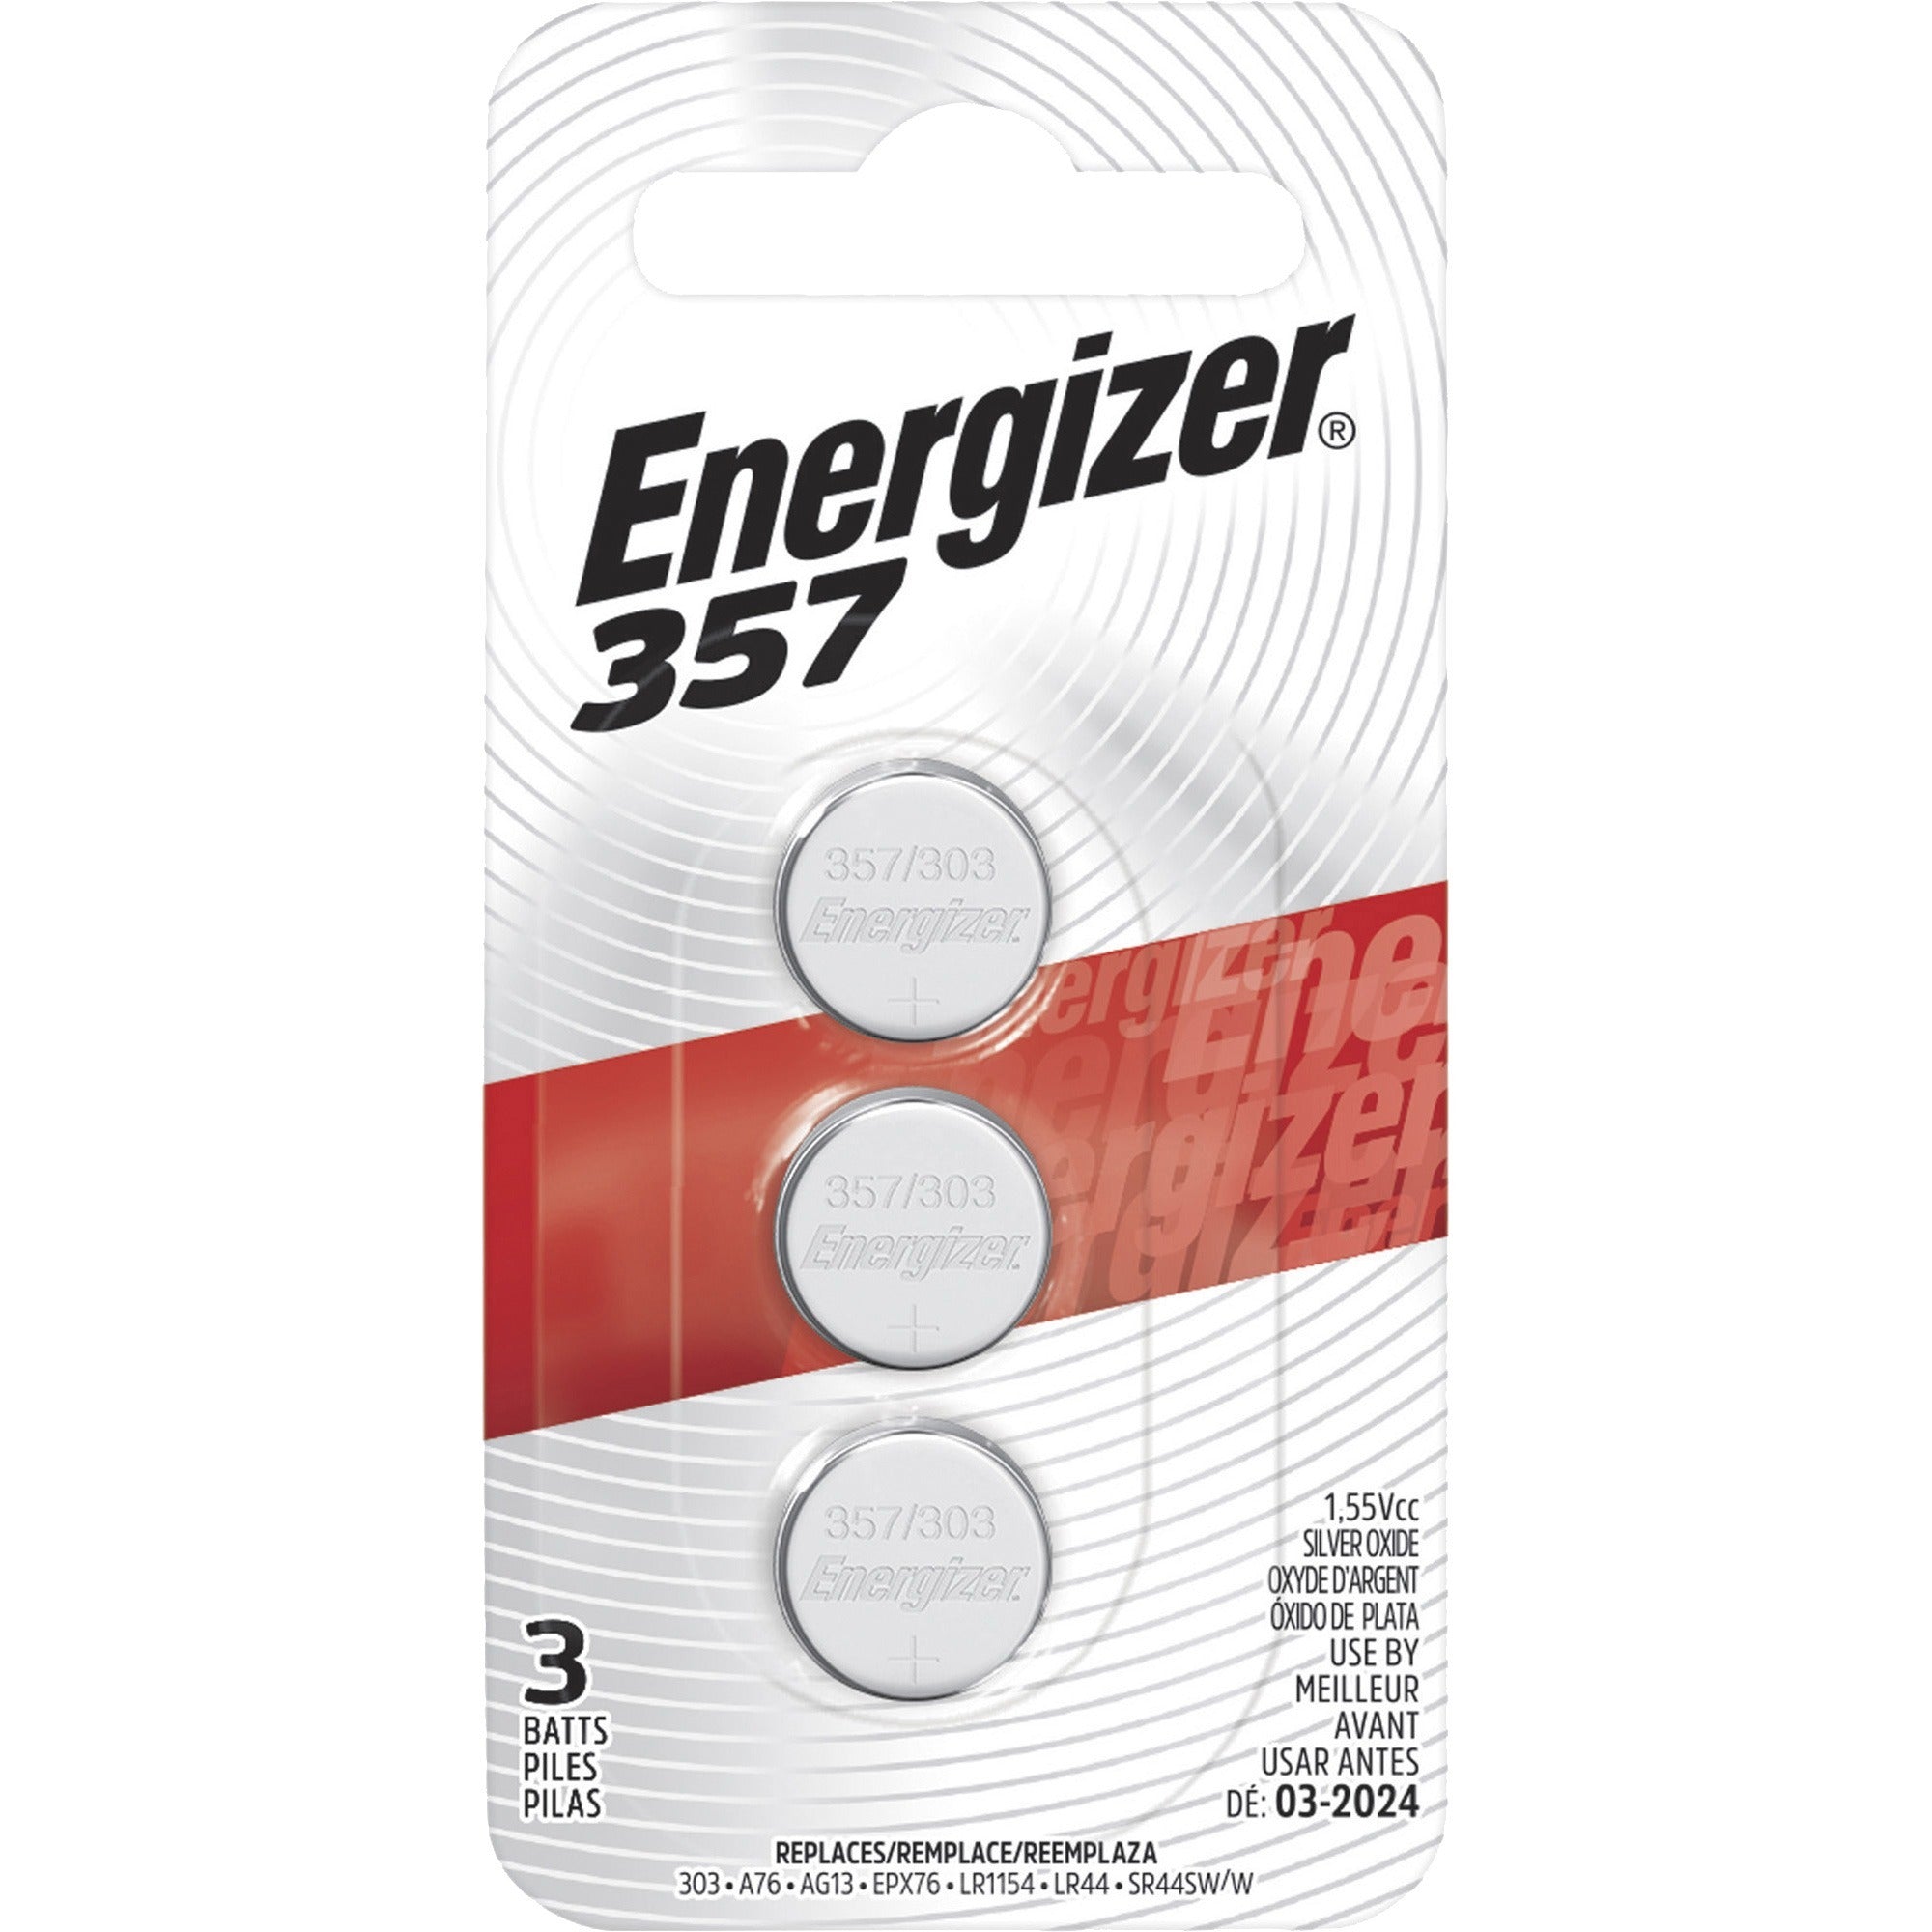 energizer-357-303-silver-oxide-button-battery-3-packs-for-multipurpose-15-v-dc-120-carton_eve357bpz3ct - 1